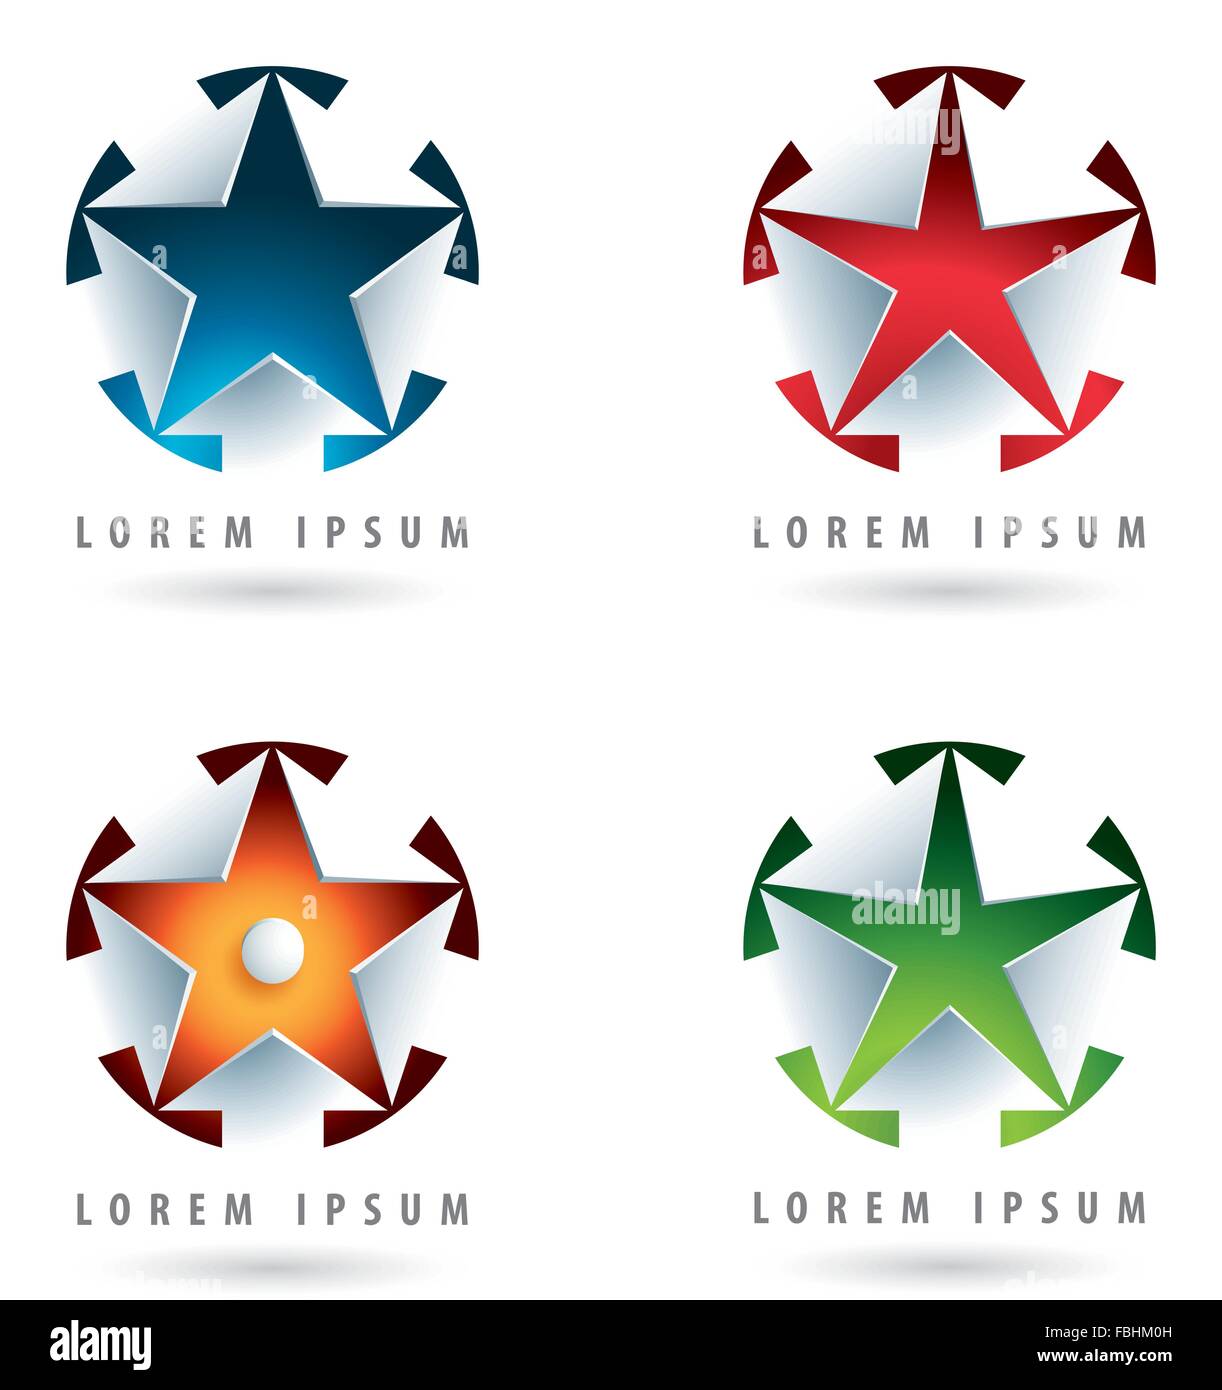 Set of modern logos with star shape and 3d effect Stock Vector